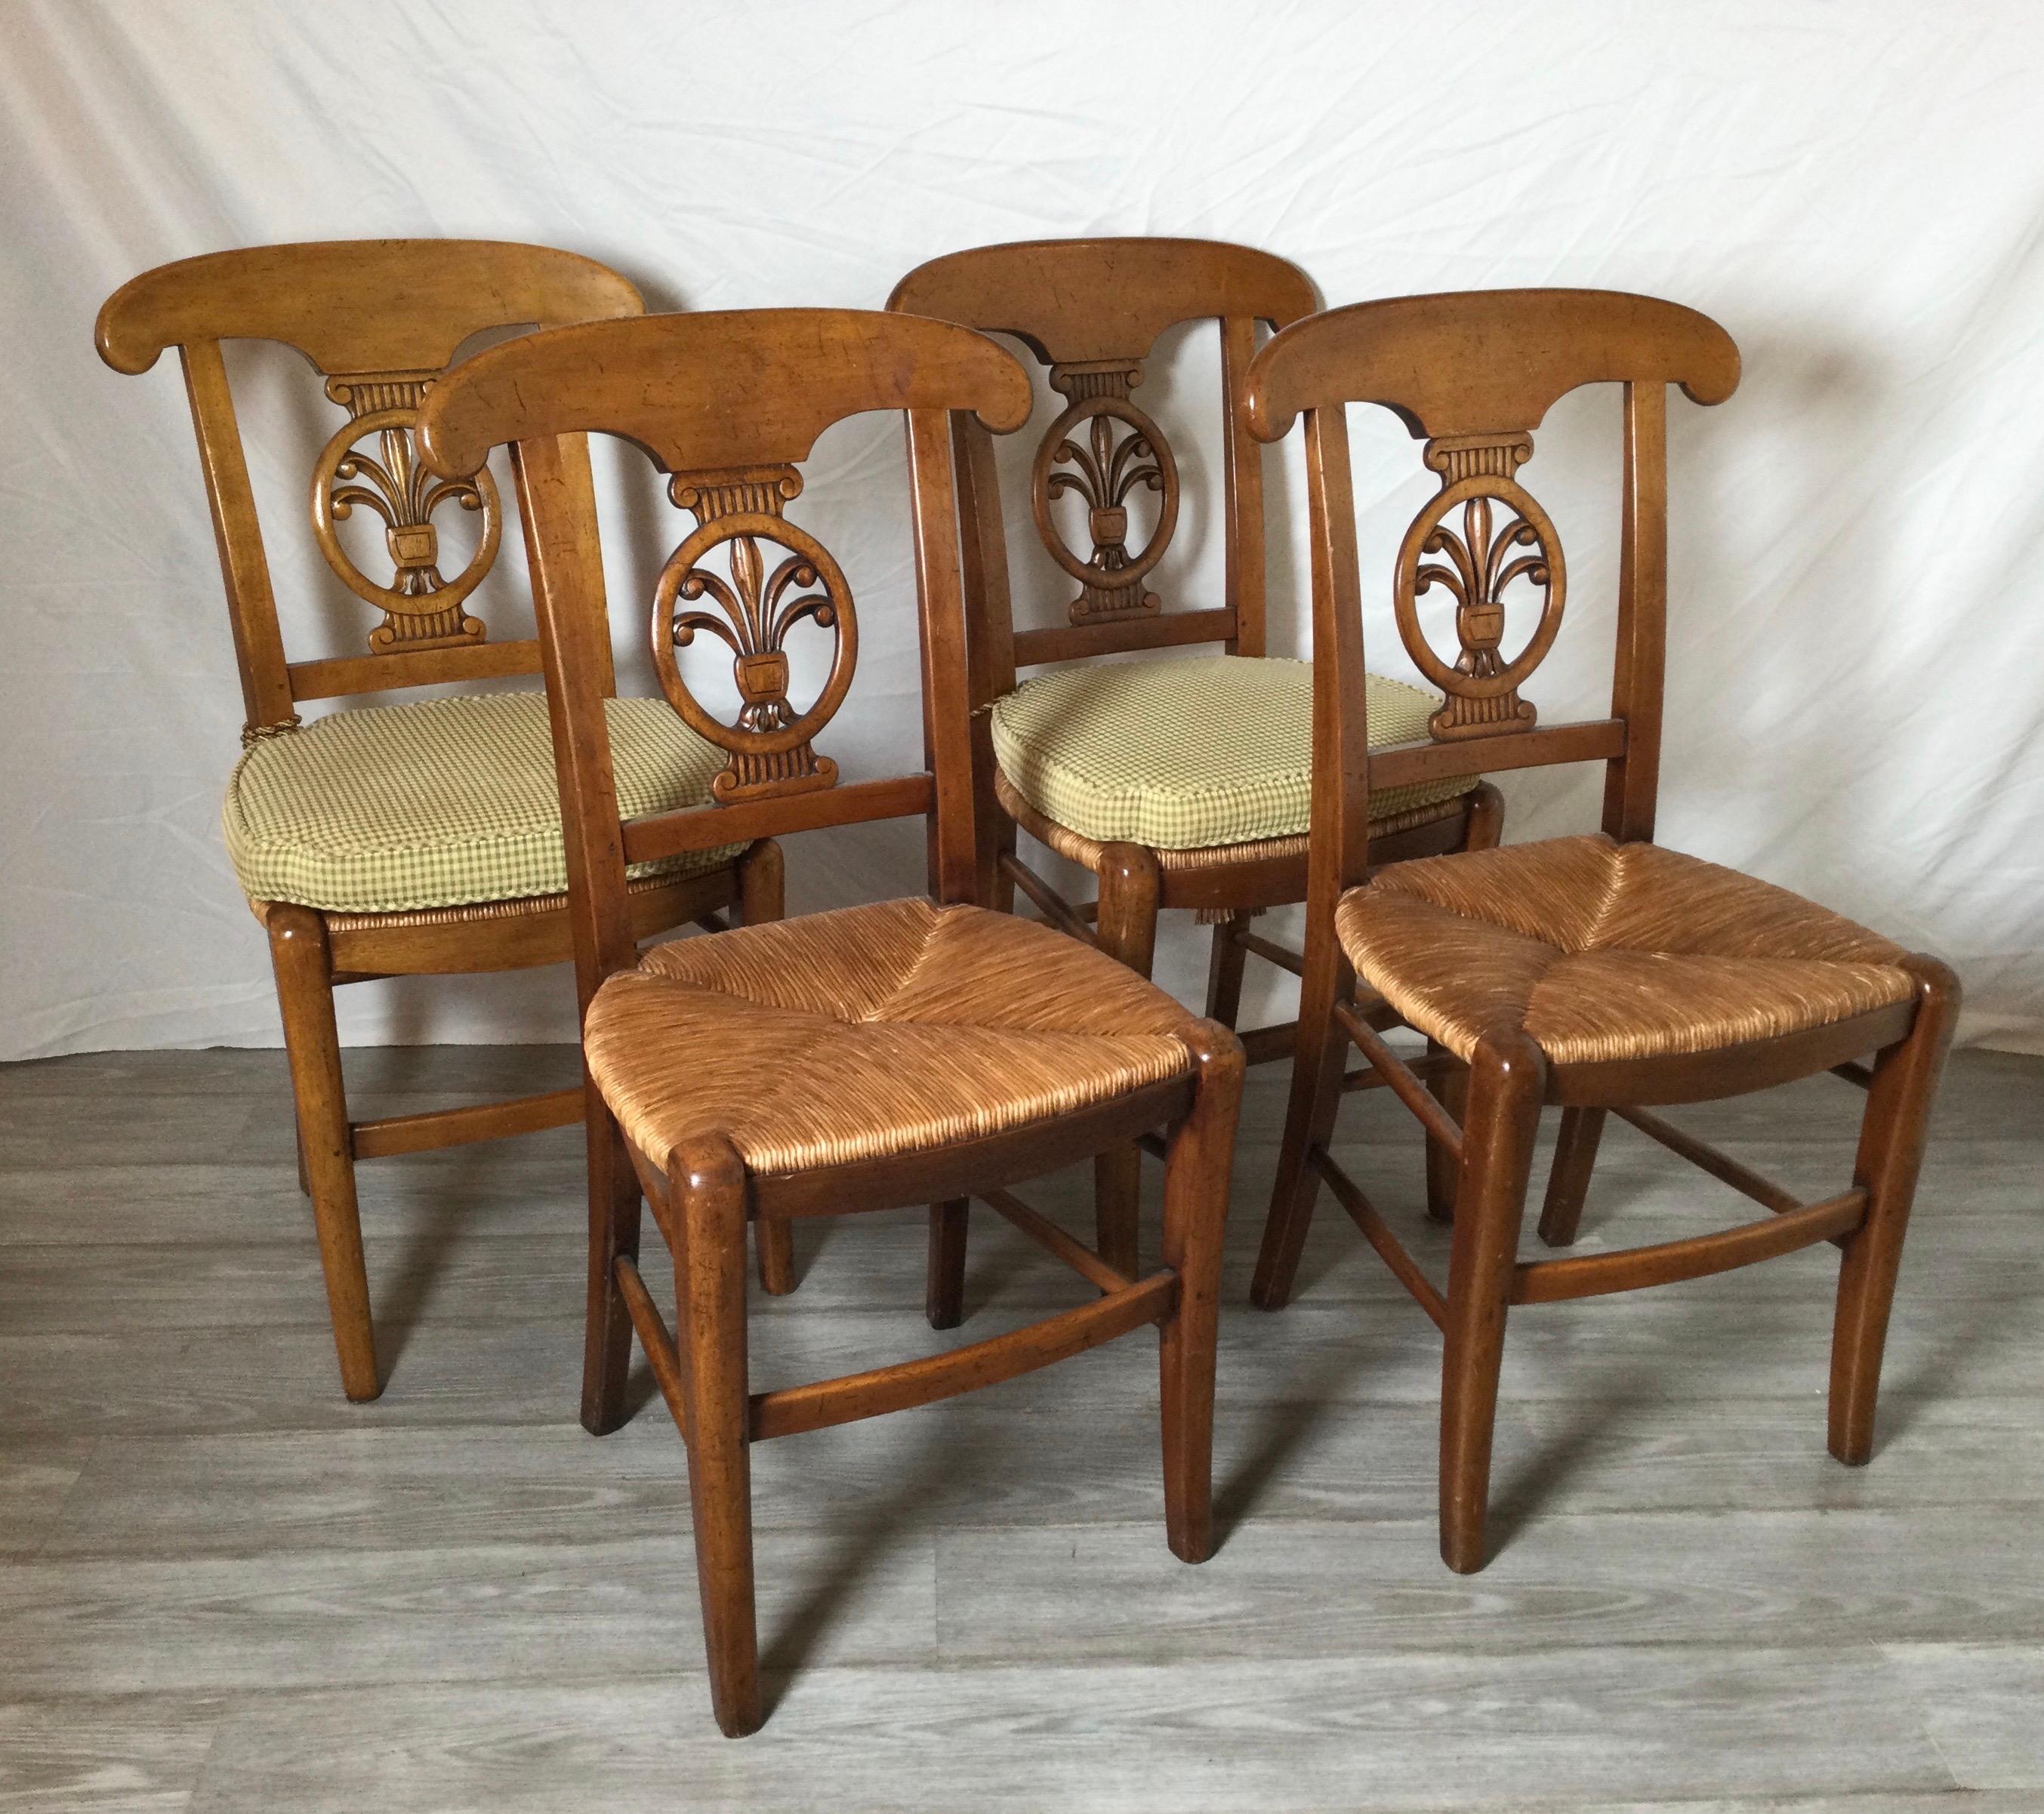 A charming set of four country French side chairs in hand carved fruitwood with rush seats. Cushions included.